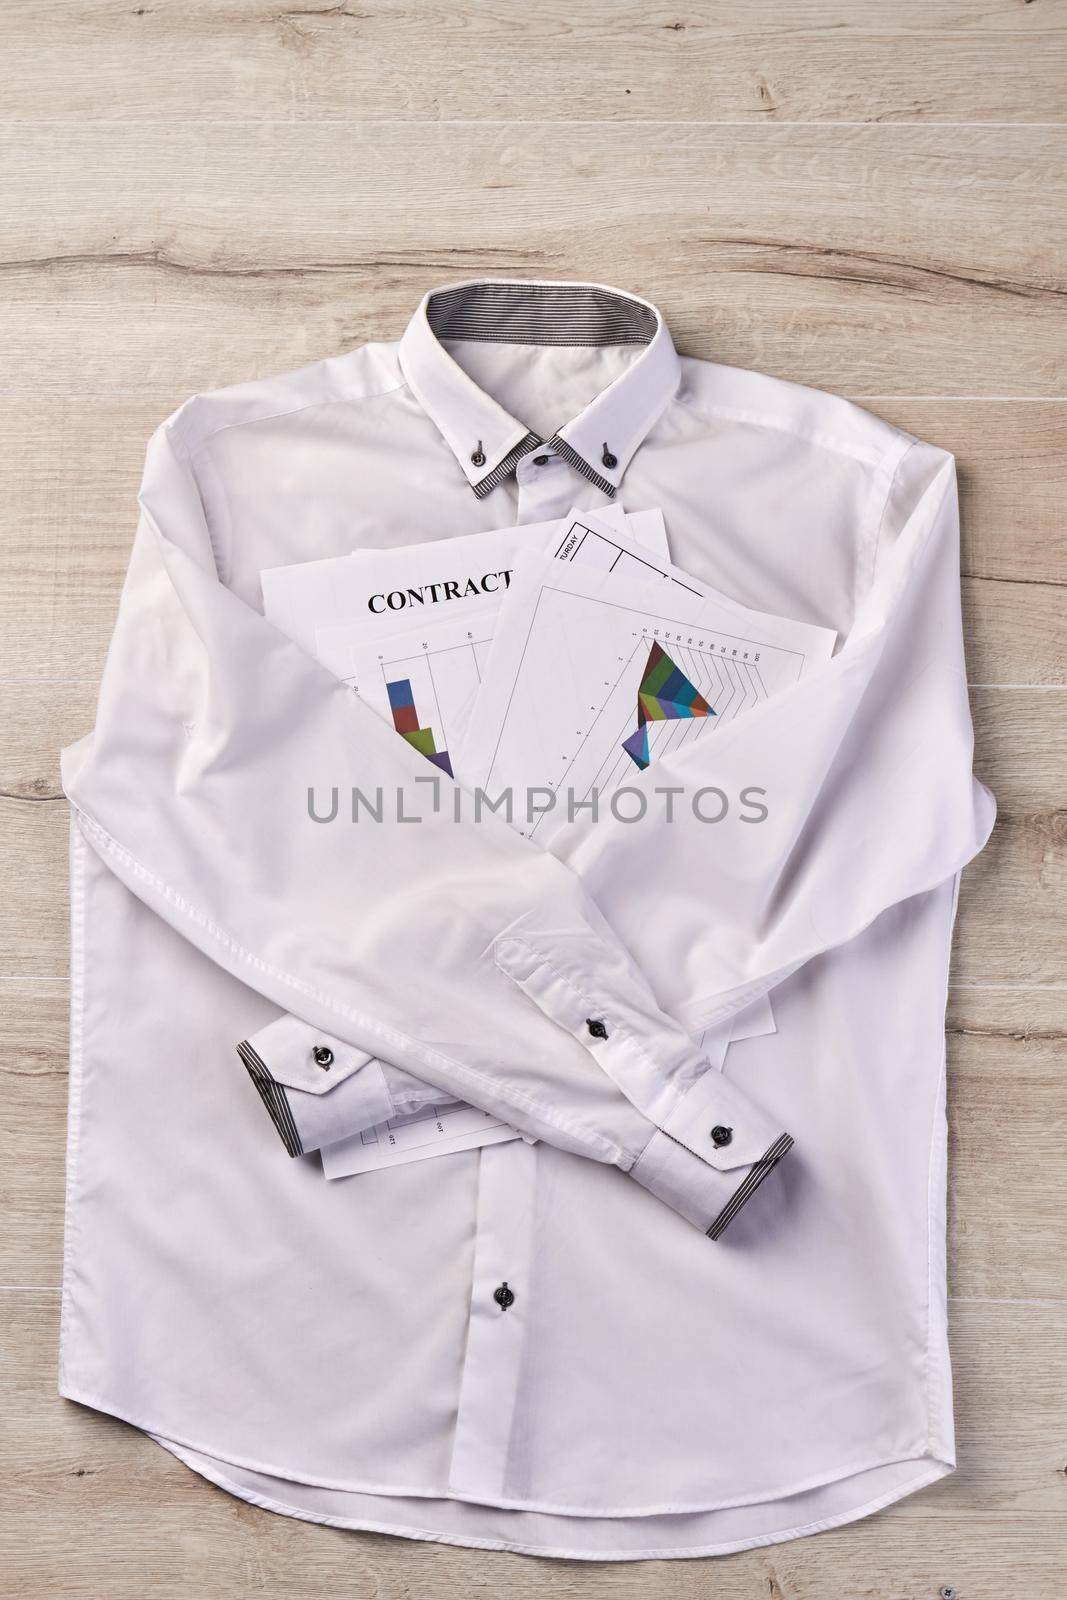 White long sleeve shirt with business papers. Statistic graphs diagrams and contract.